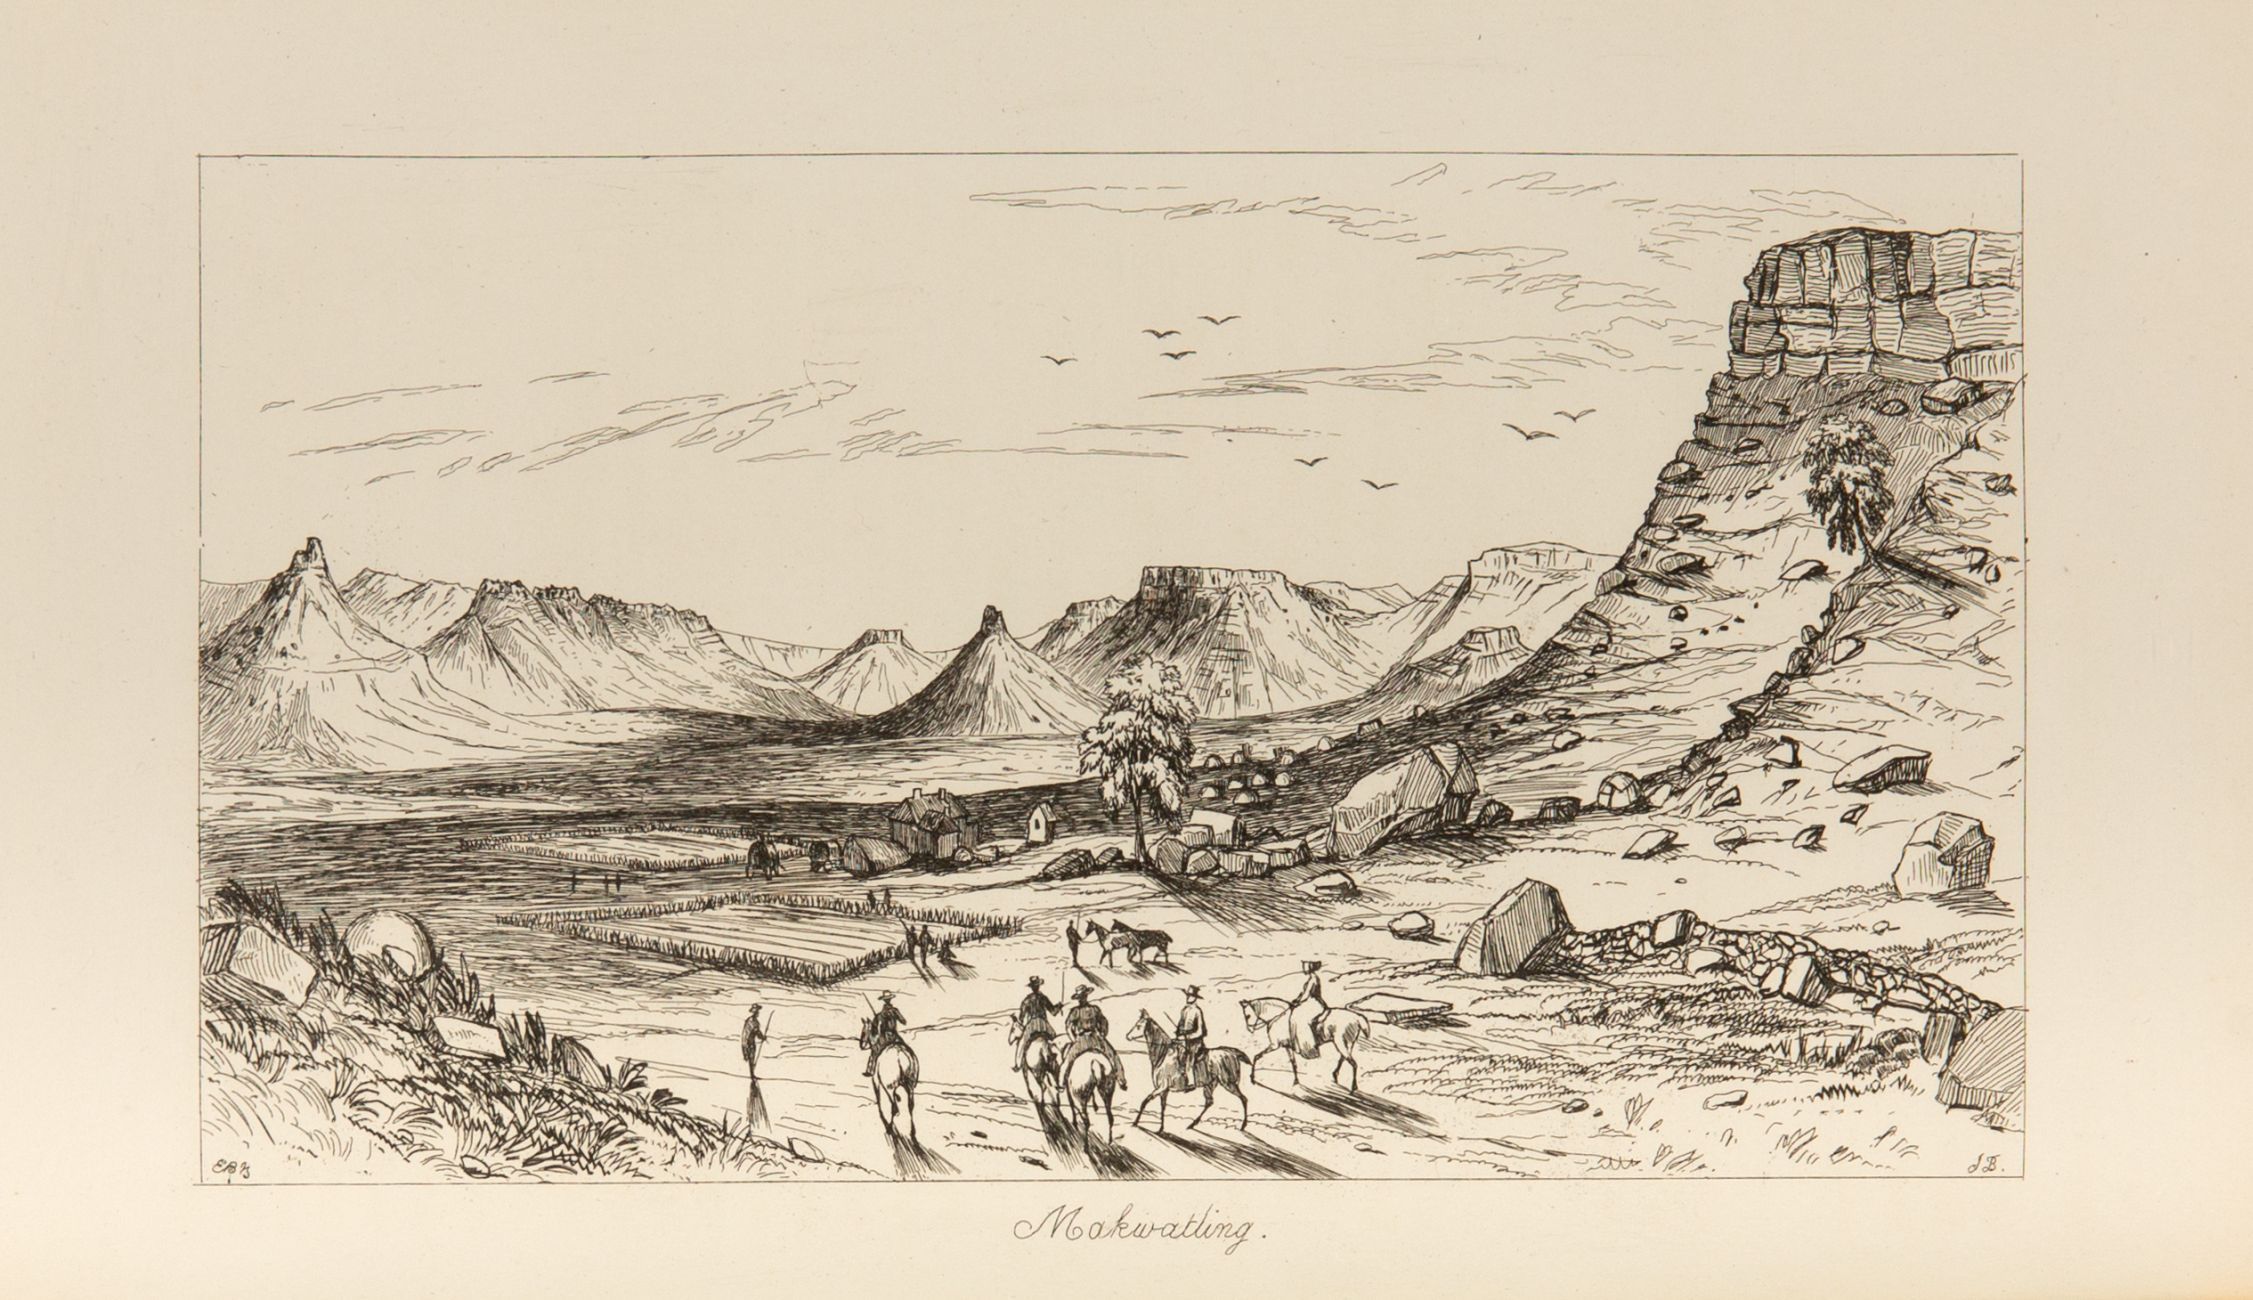 J. Backhouse, A narrative of a visit to the Mauritius and South Africa. London 1844. - Image 2 of 3